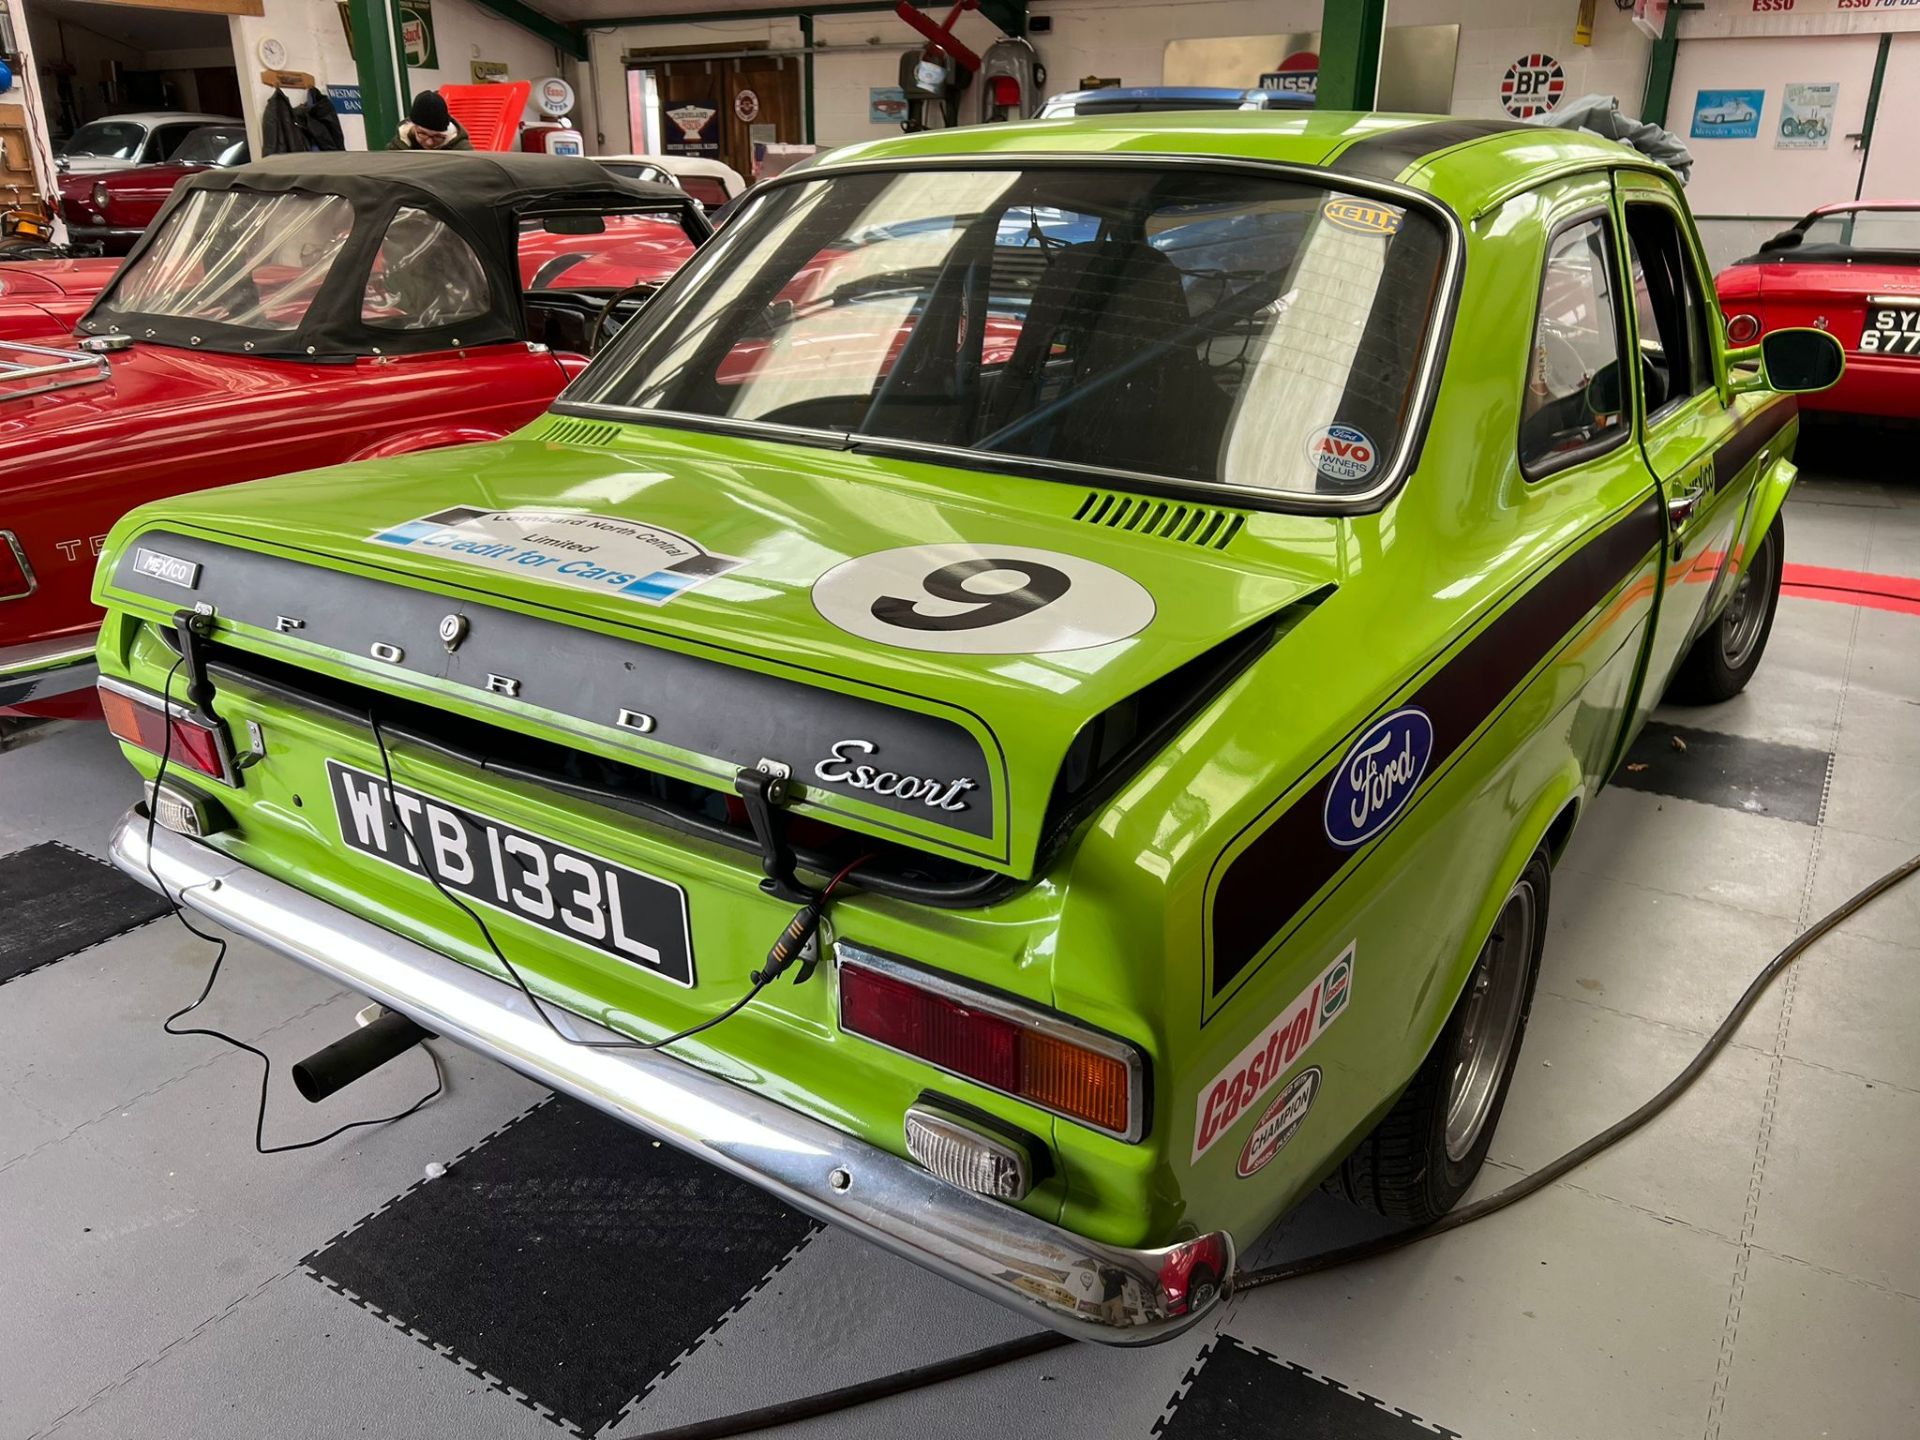 Ford Escort Mk1 - Mexico Homage Competition Car - Image 3 of 18